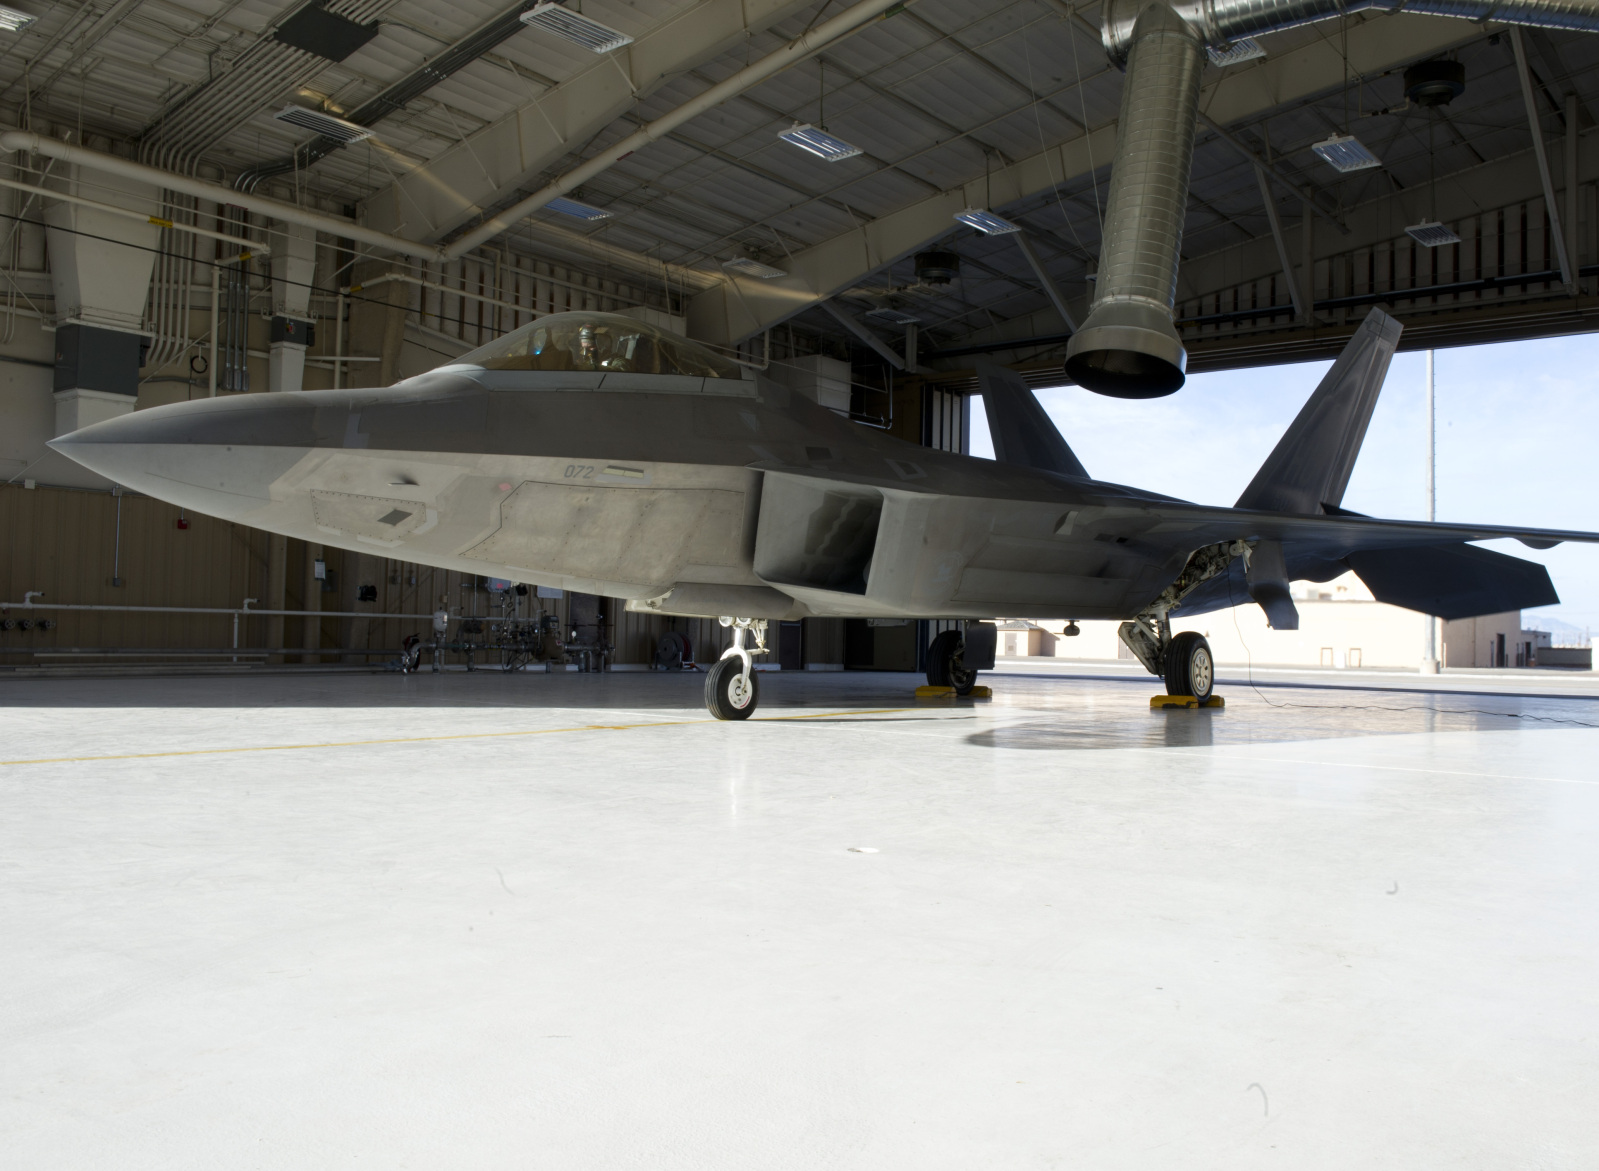 Lockheed+Martin+F-22+Raptor+twin-engine+fifth-generation+supermaneuverable+fighter+aircraft+stealth+technology+United+States+Air+Force+A+B+C+D+%25283%2529.jpg